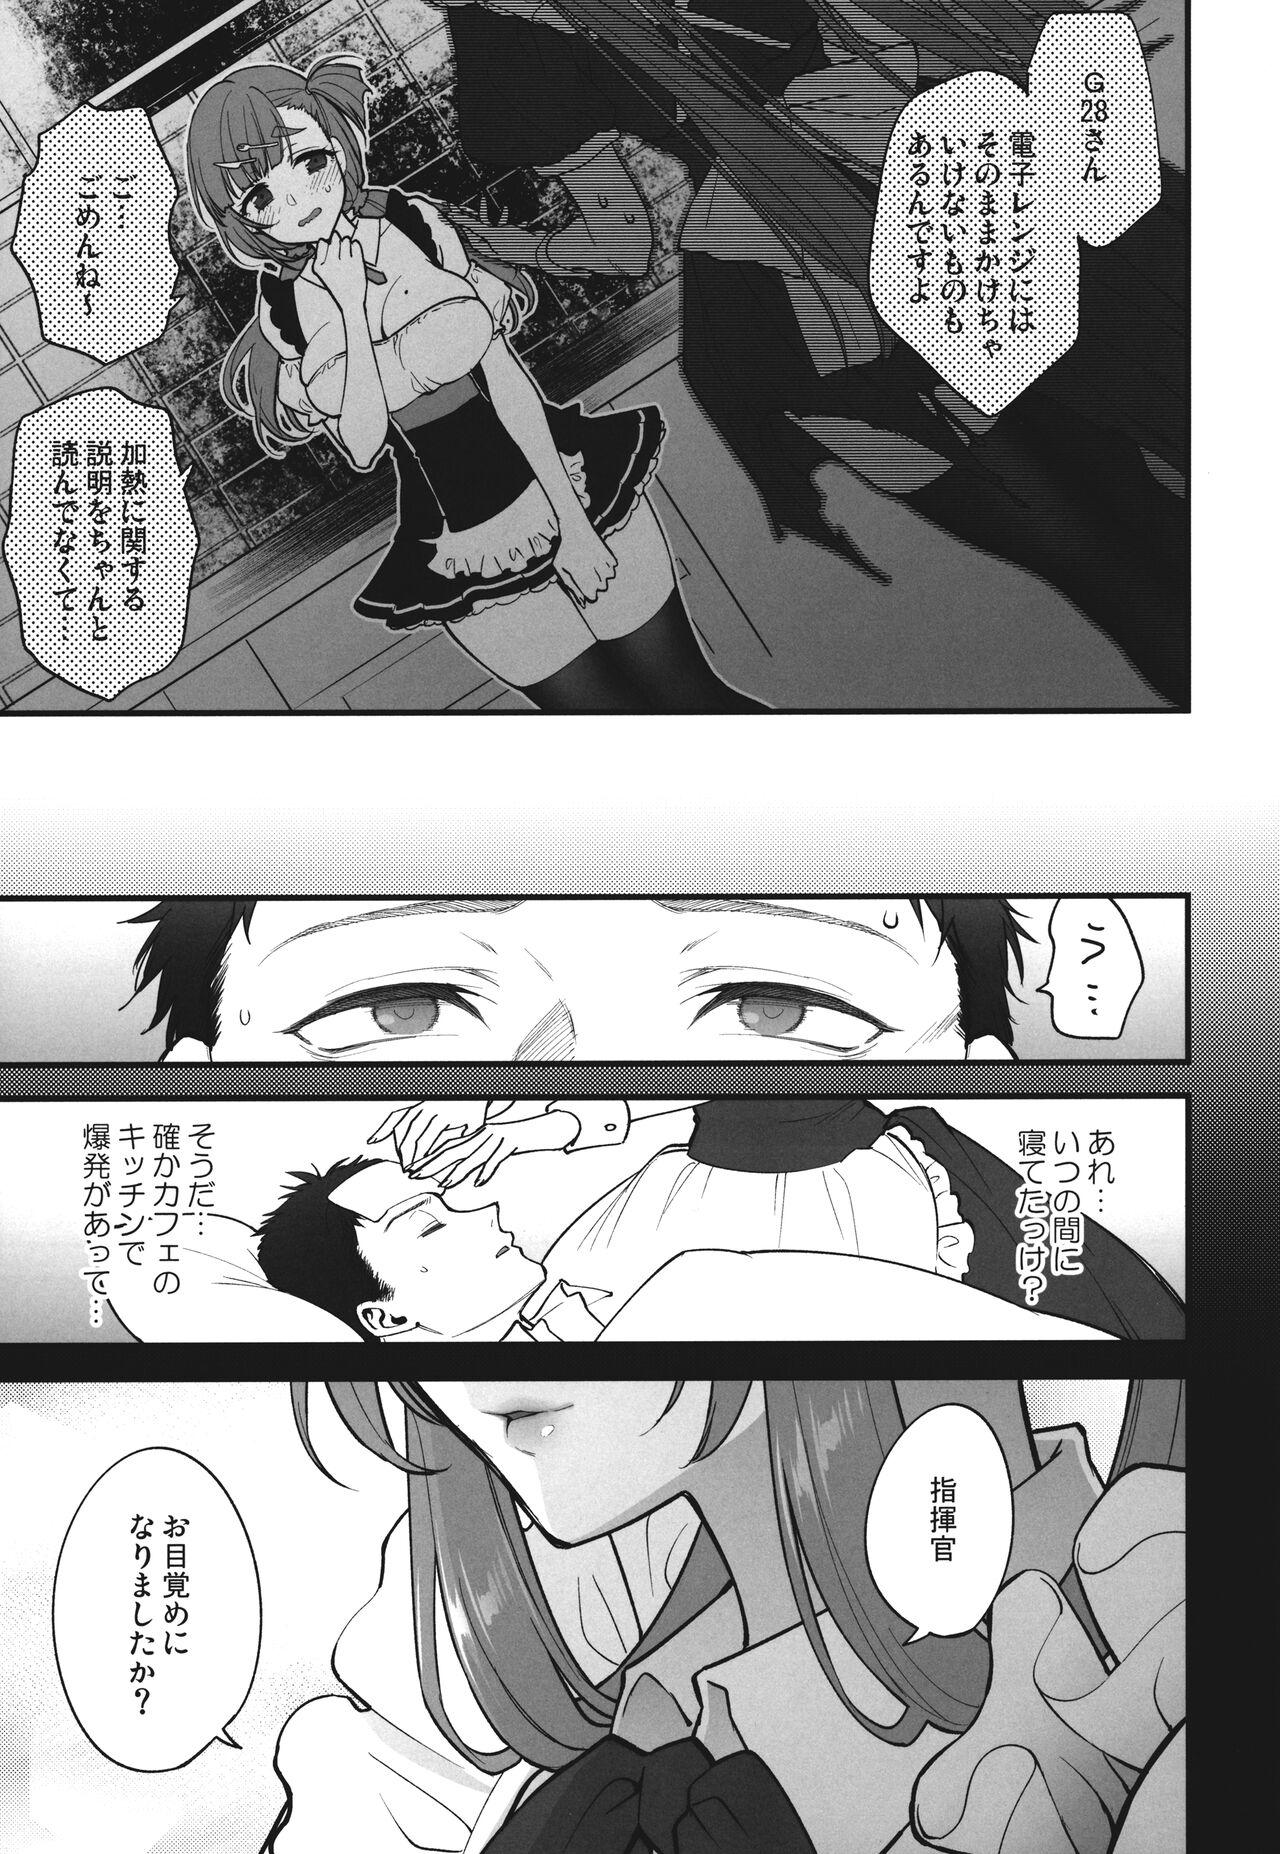 Assfucking Make me Yours - Girls frontline Sapphicerotica - Page 6